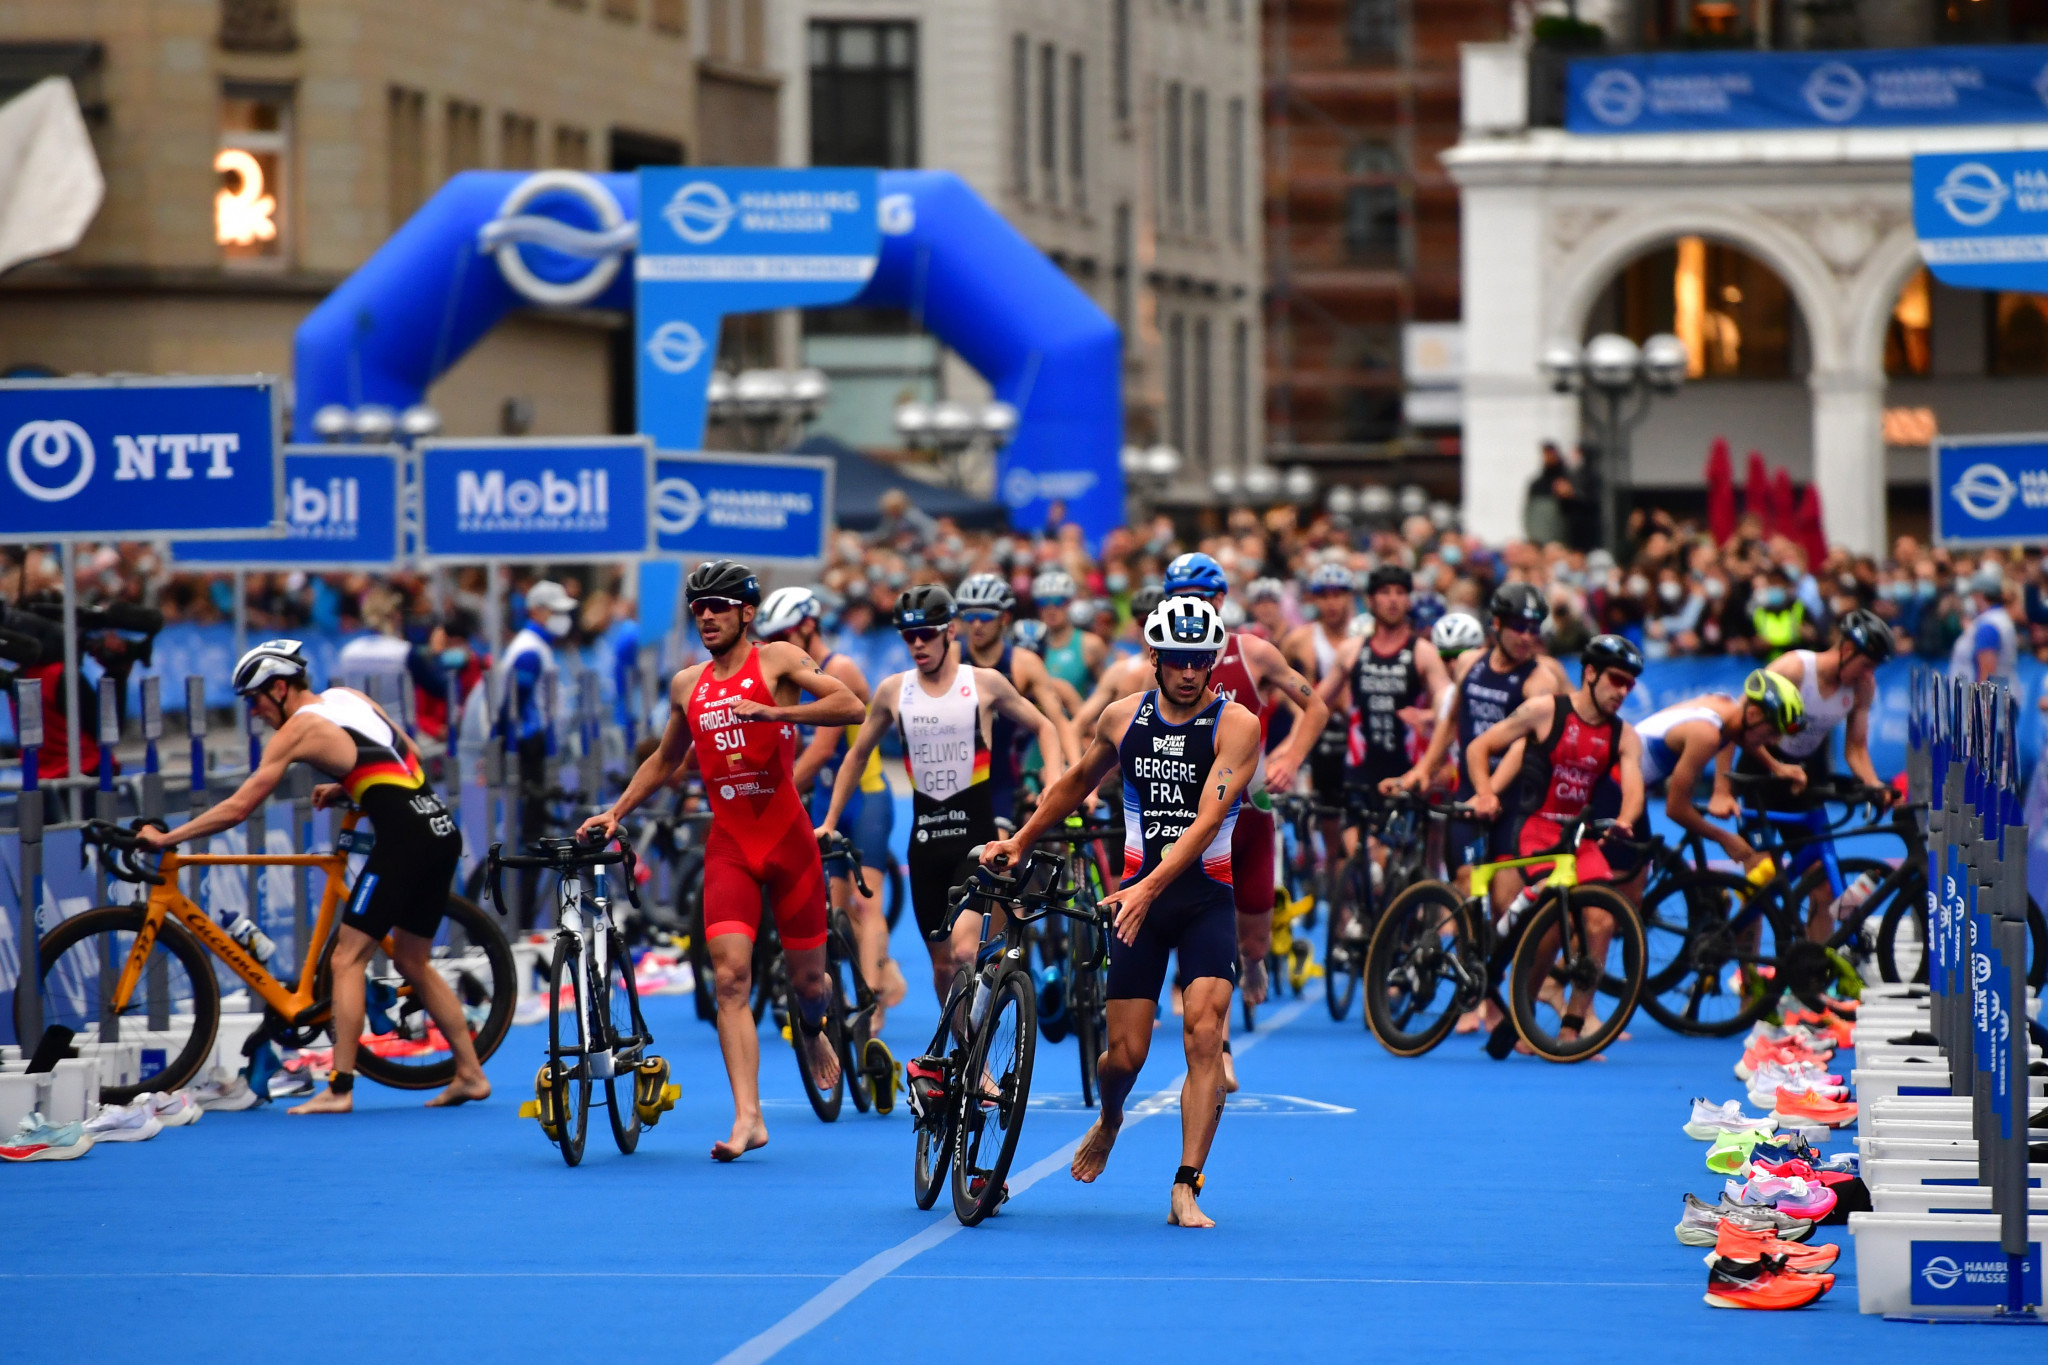 Léo Bergere is tipped to win the individual men's race at the World Triathlon Championship Series in Hamburg ©Getty Images